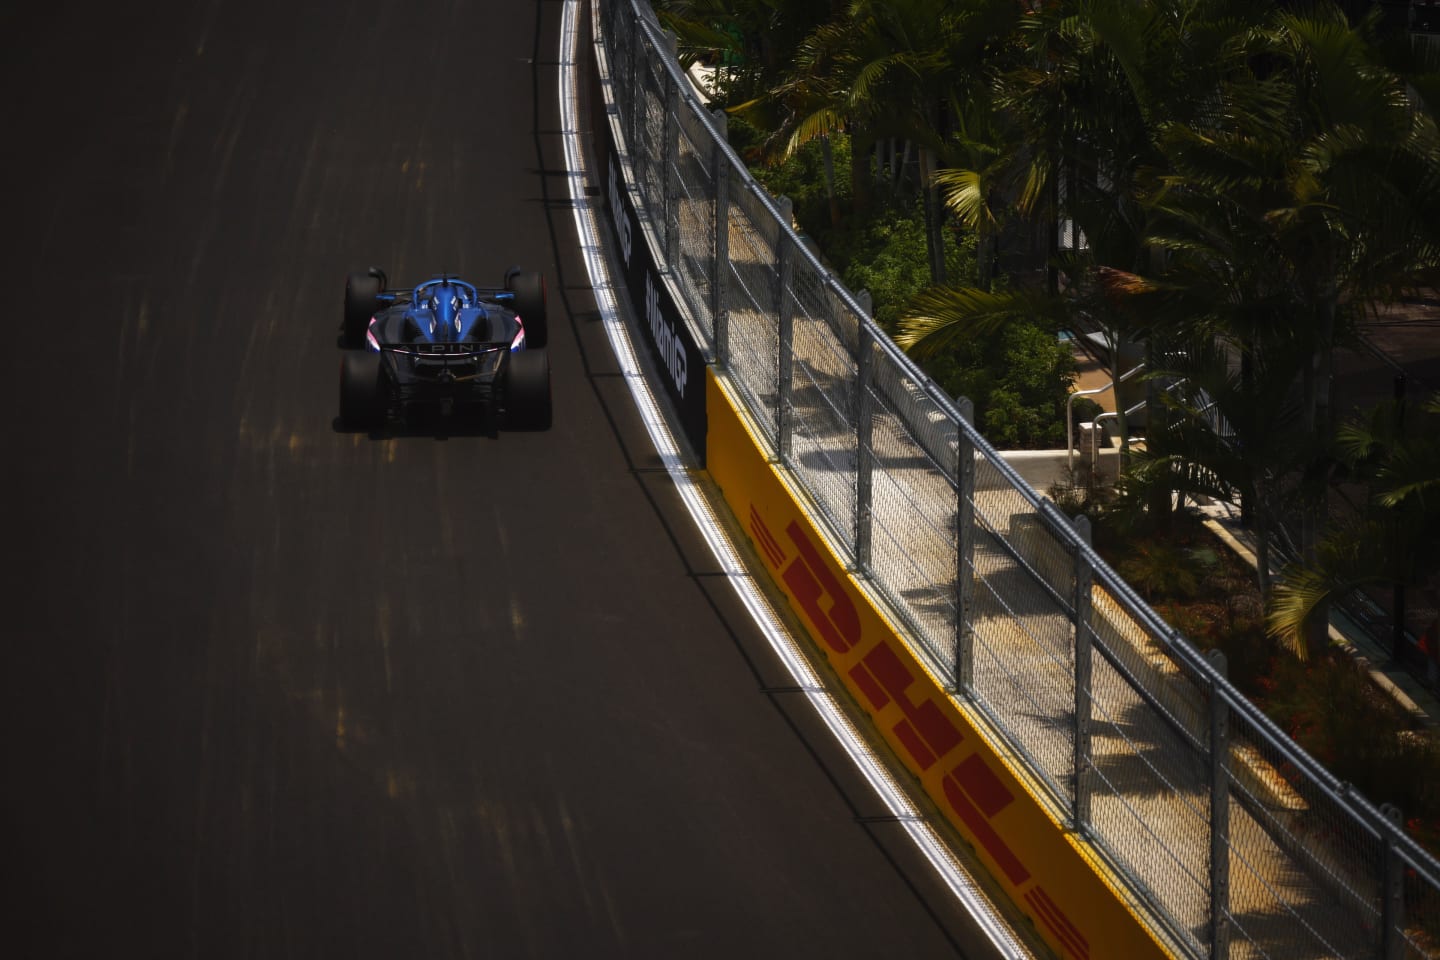 MIAMI, FLORIDA - MAY 06: Esteban Ocon of France driving the (31) Alpine F1 A523 Renault on track during final practice ahead of the F1 Grand Prix of Miami at Miami International Autodrome on May 06, 2023 in Miami, Florida. (Photo by Jared C. Tilton/Getty Images)